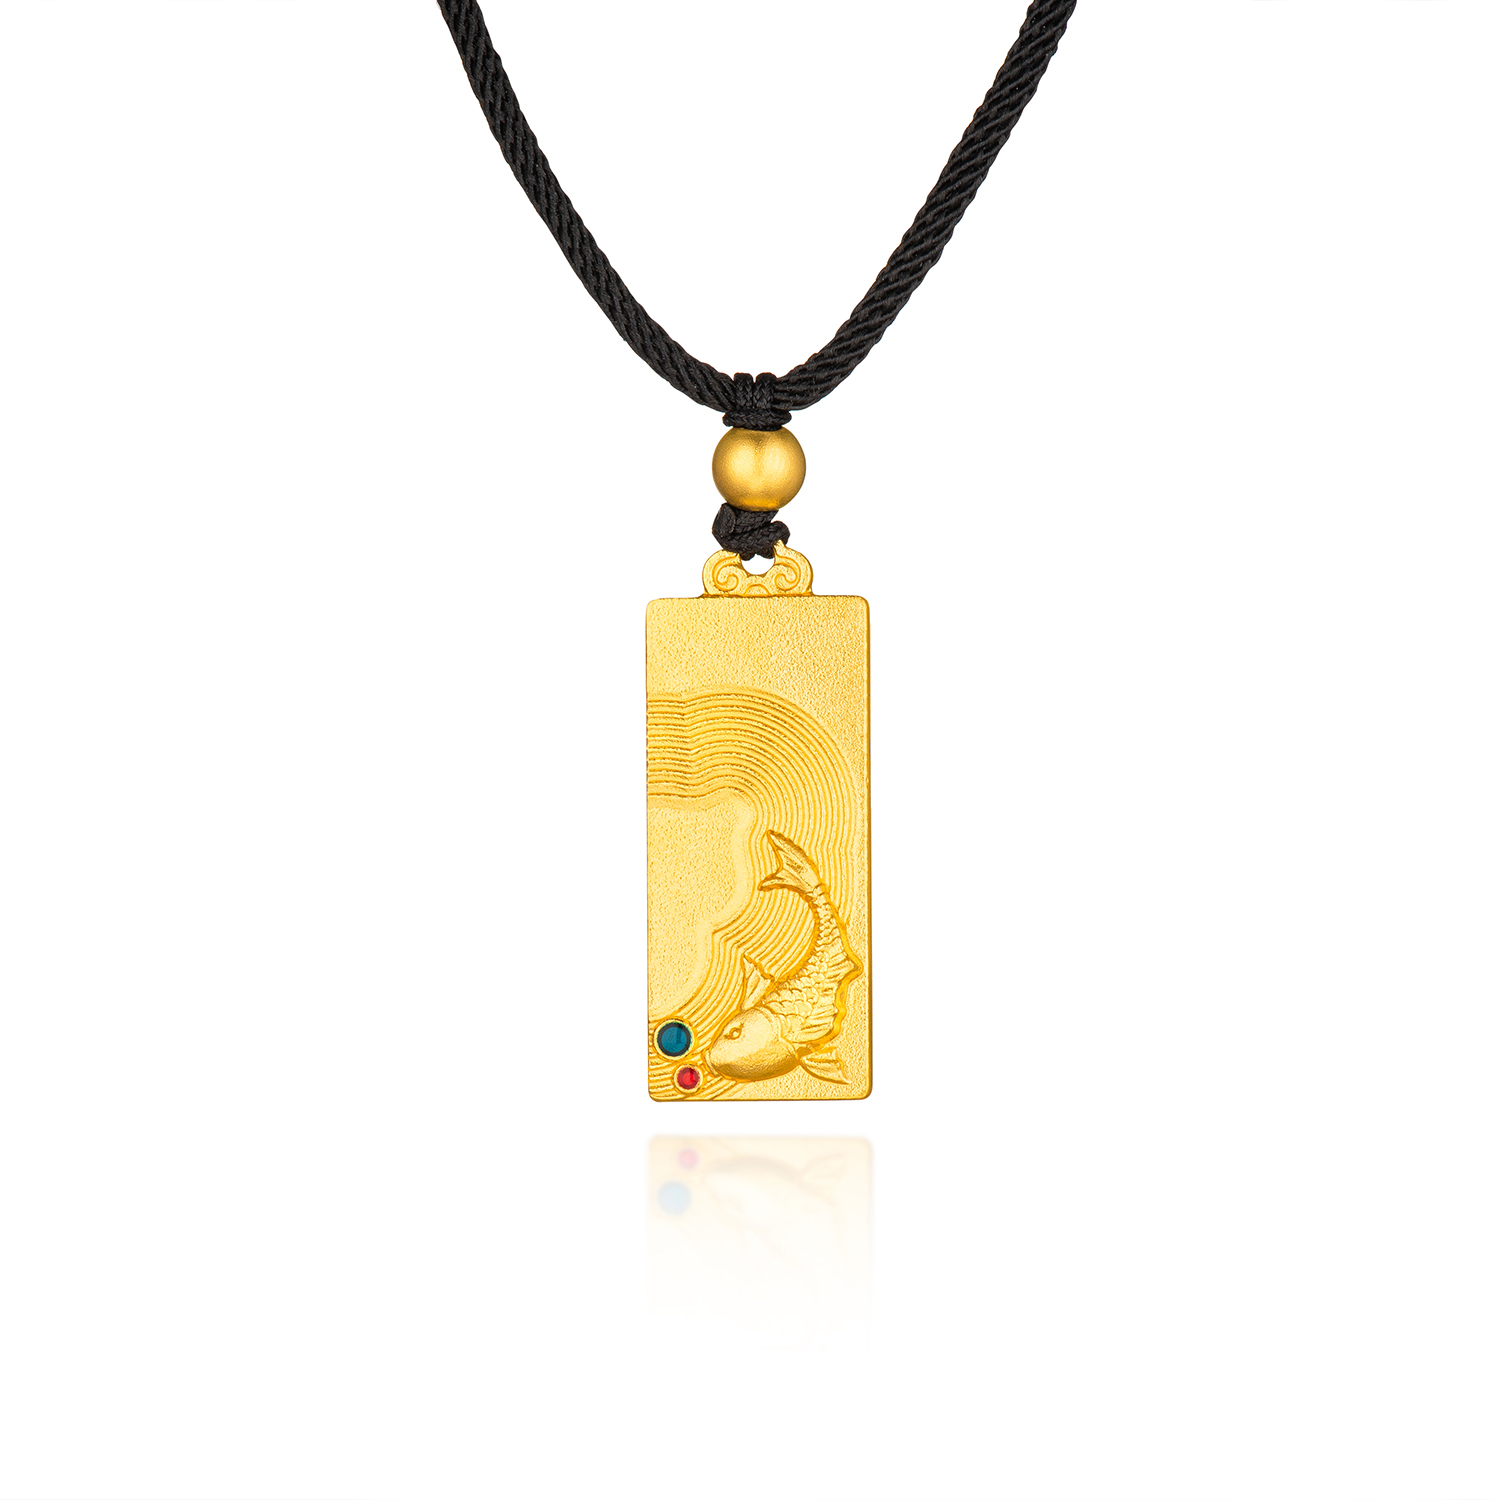 Heirloom Fortune Collection “Endless Fortune” Gold Couple Necklace 